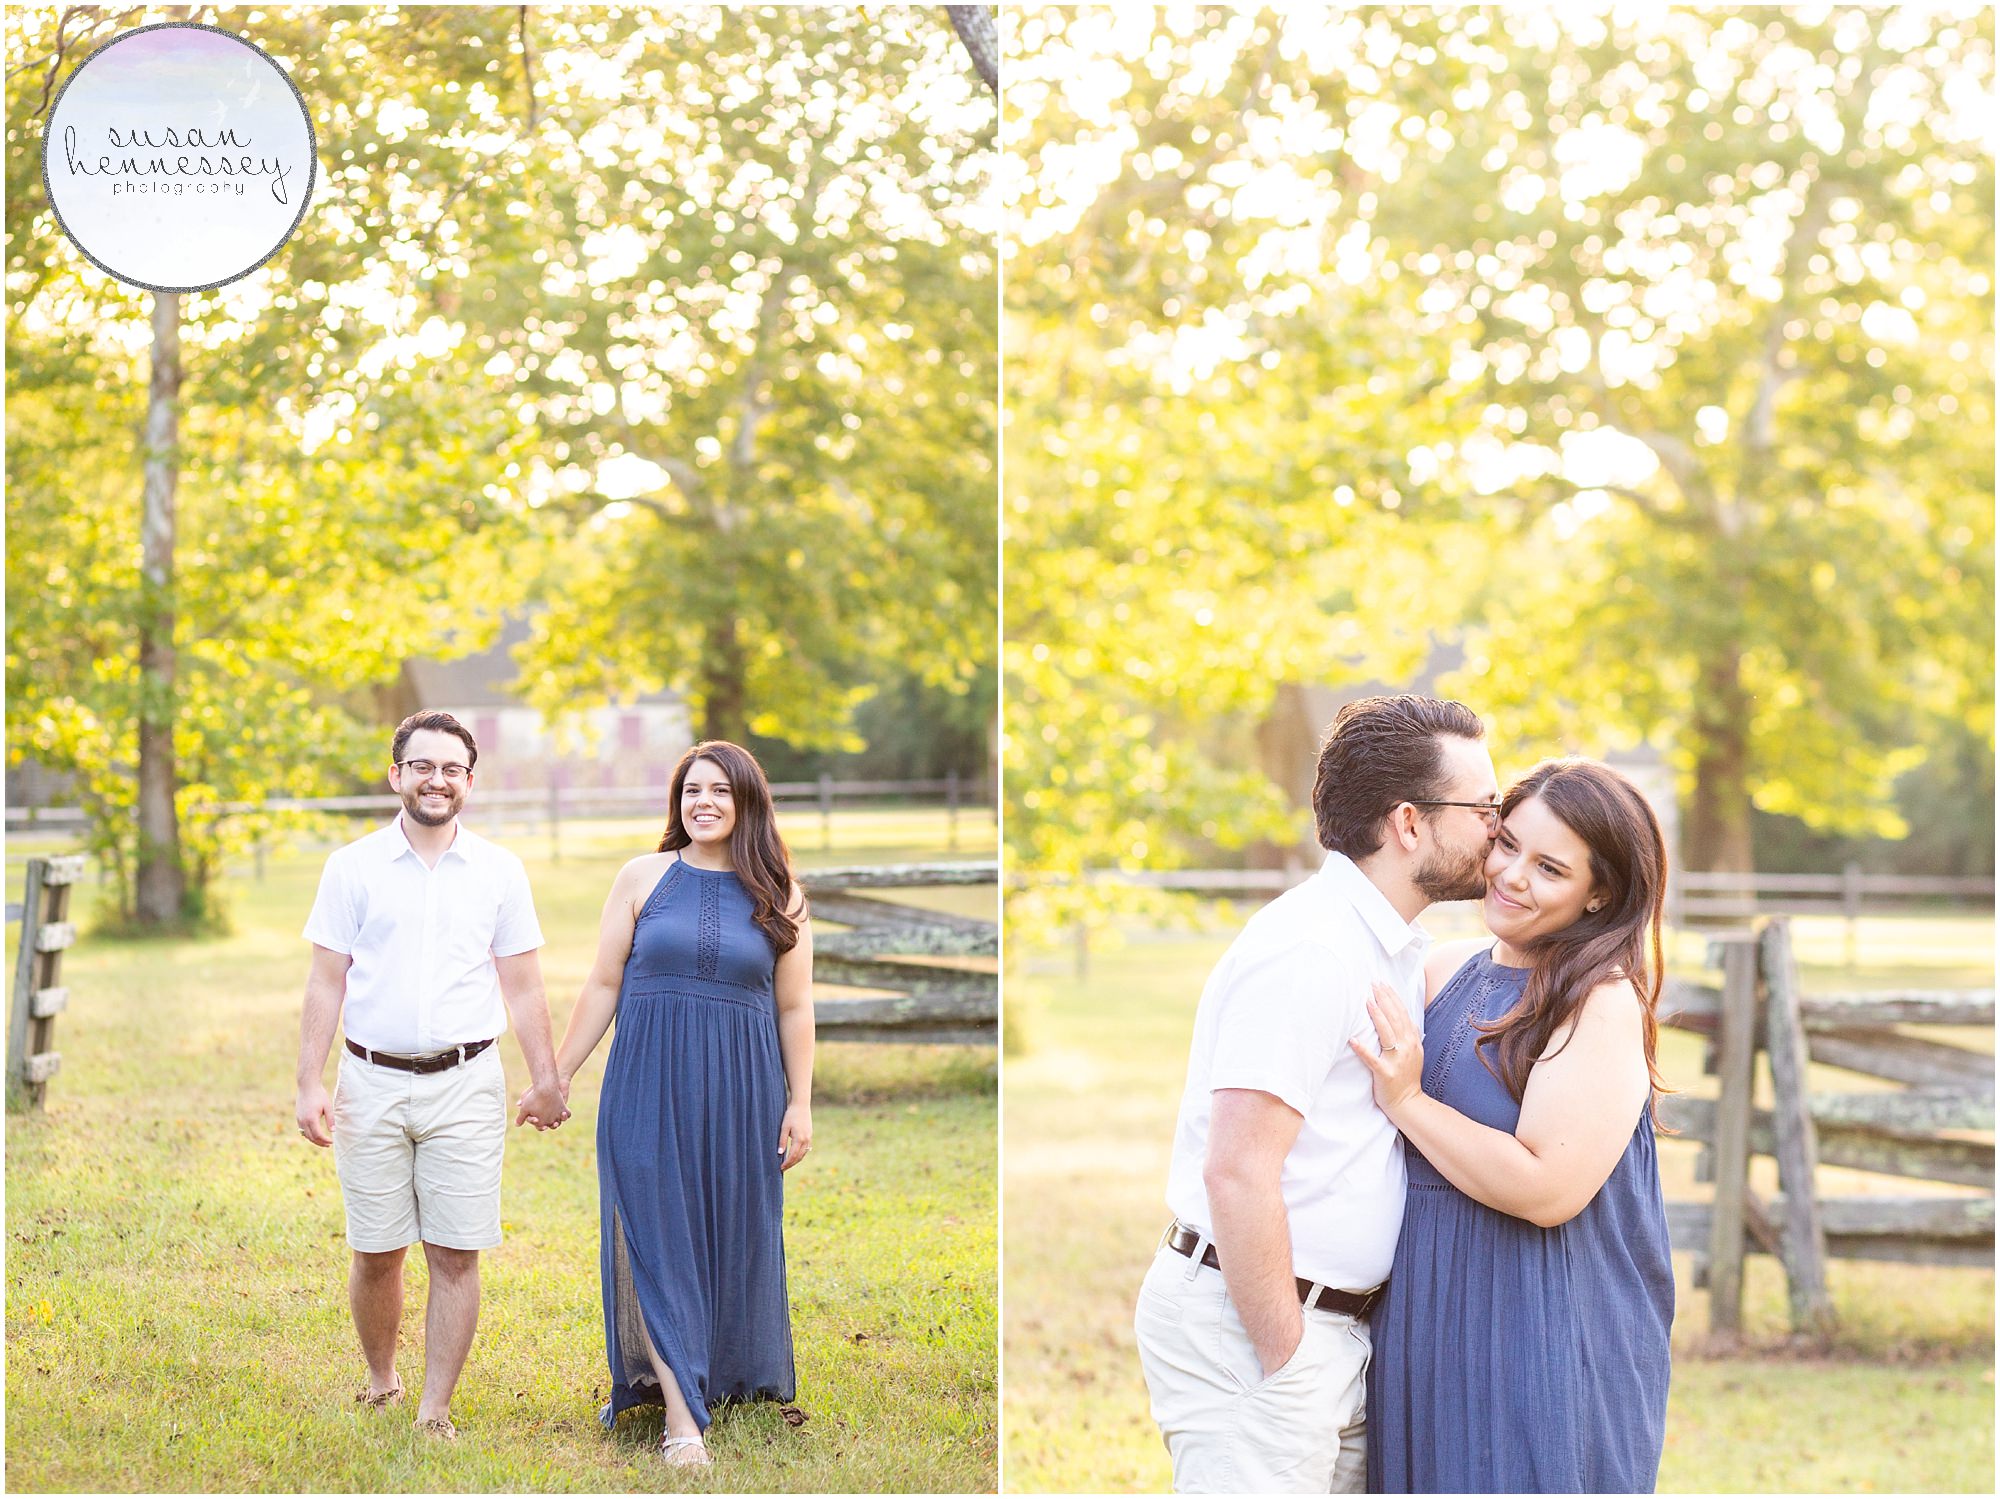 Perfect light for an engagement session at Batsto Village 